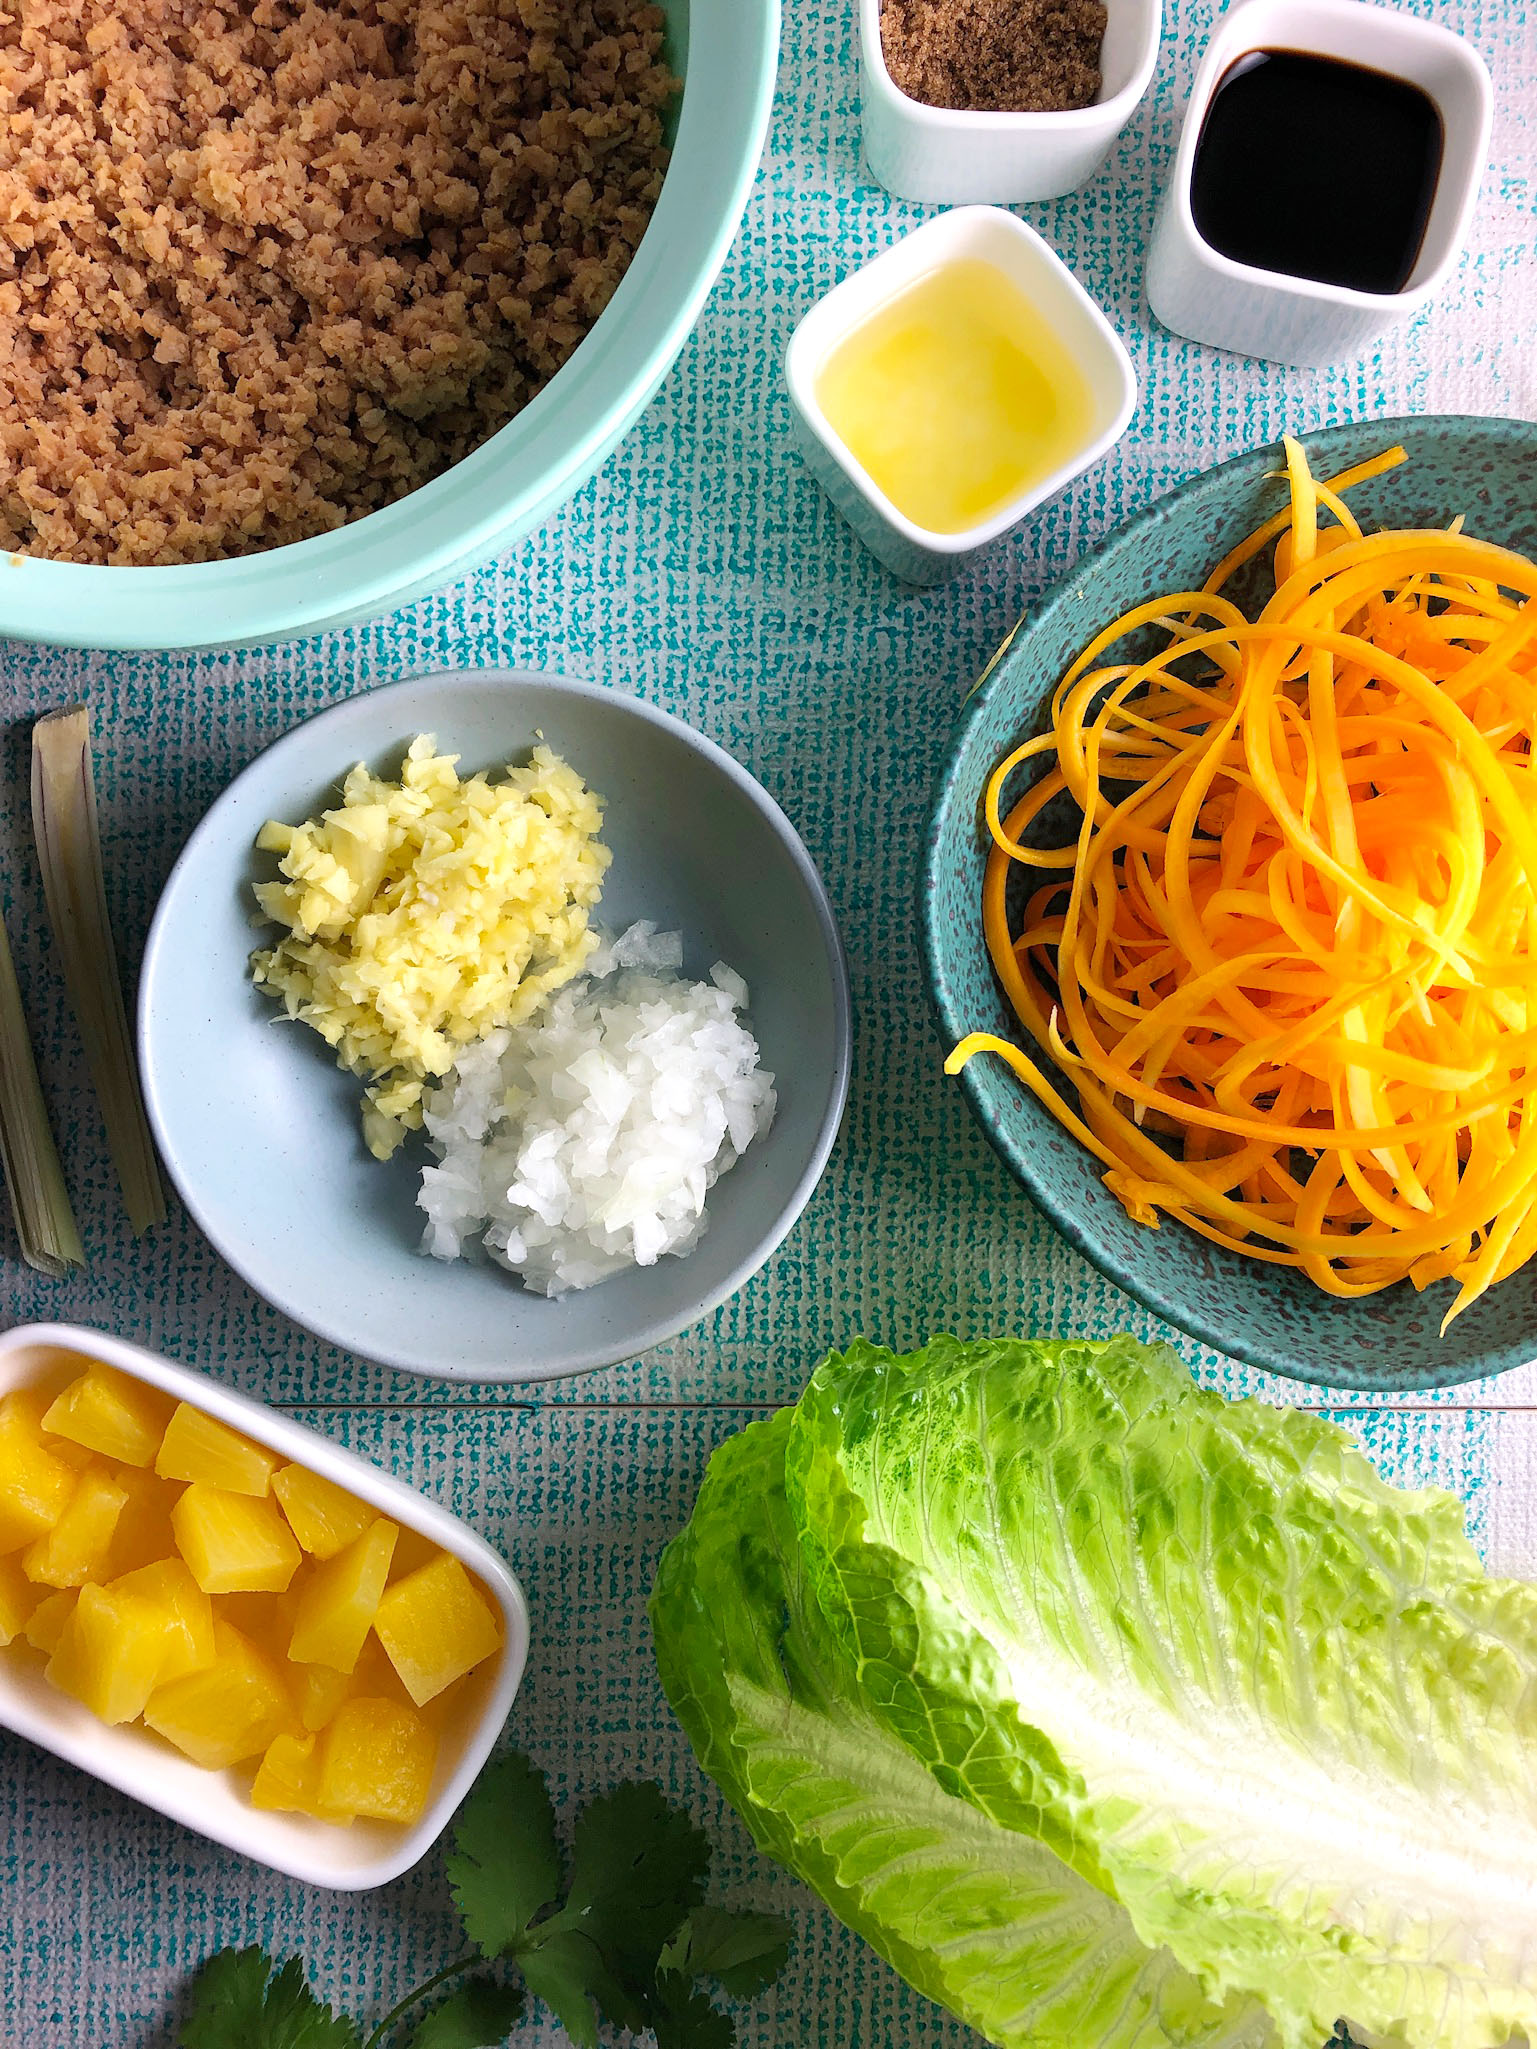 Top-down view of ingredients for lettuce wraps: Textured veggie protein (or pork), brown sugar, soya sauce, pineapple juice, carrots, lettuce, pineapple, diced onion, diced ginger